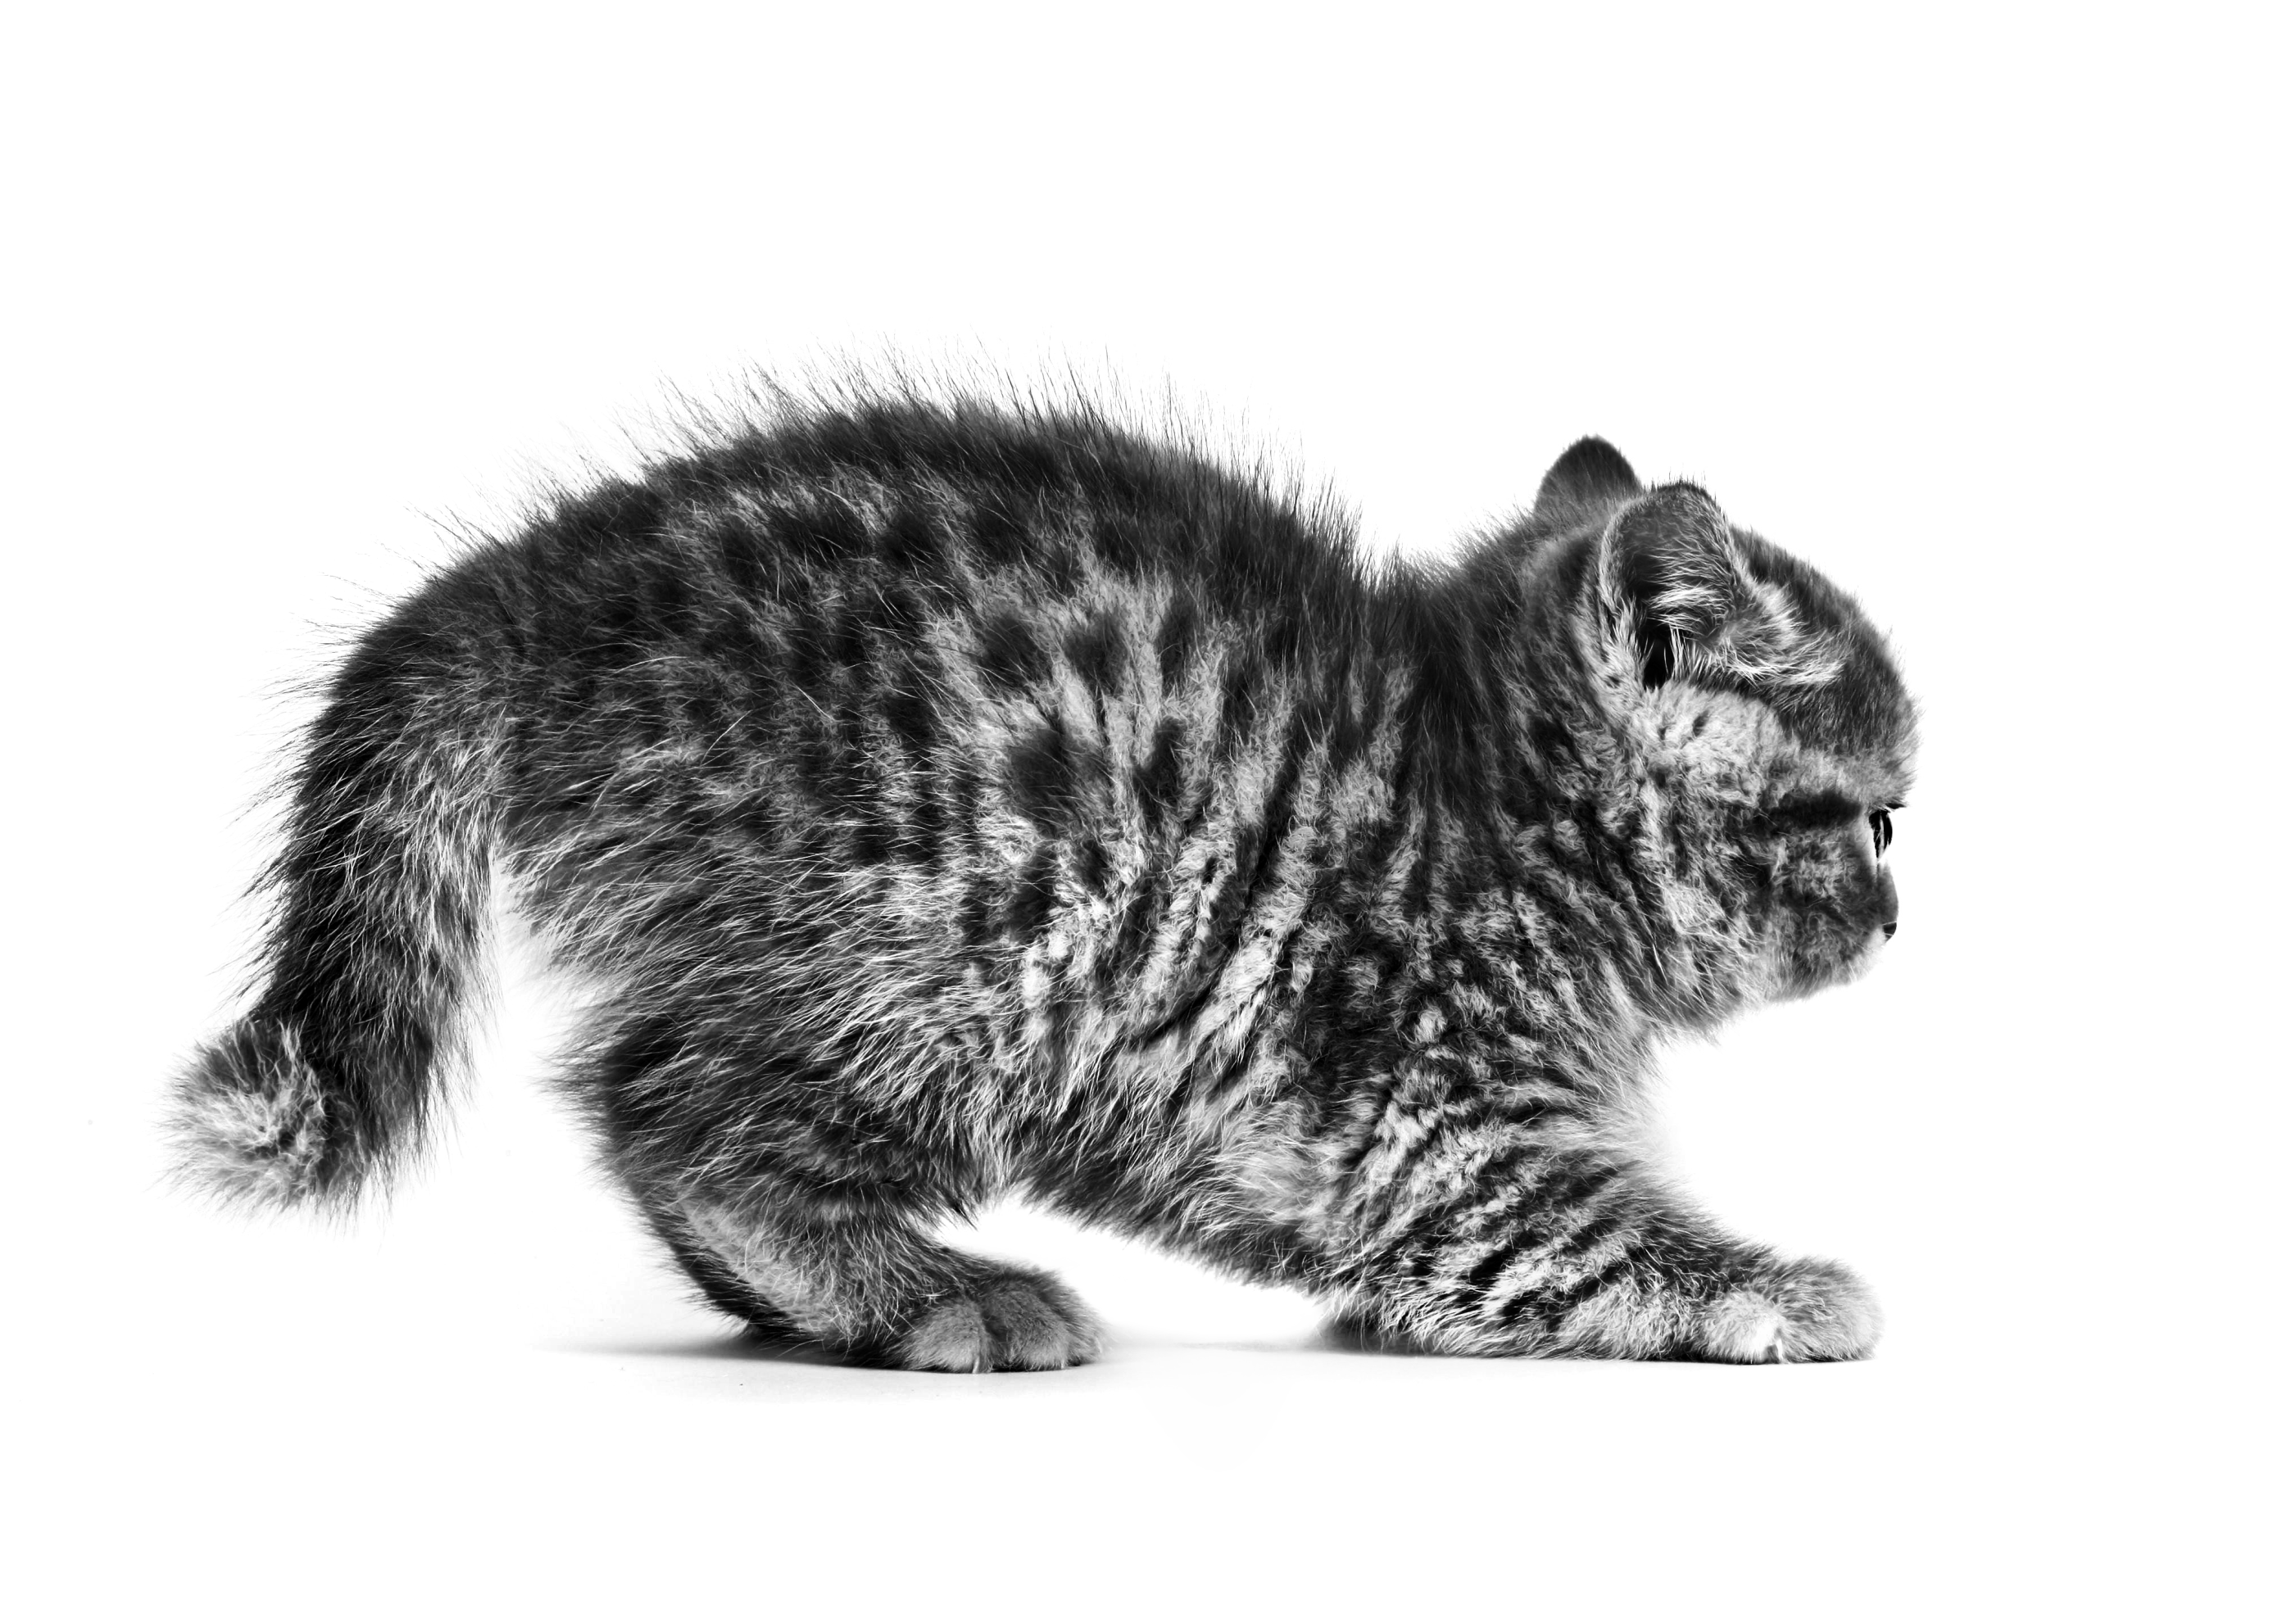 British Shorthair kitten in black and white on a white background